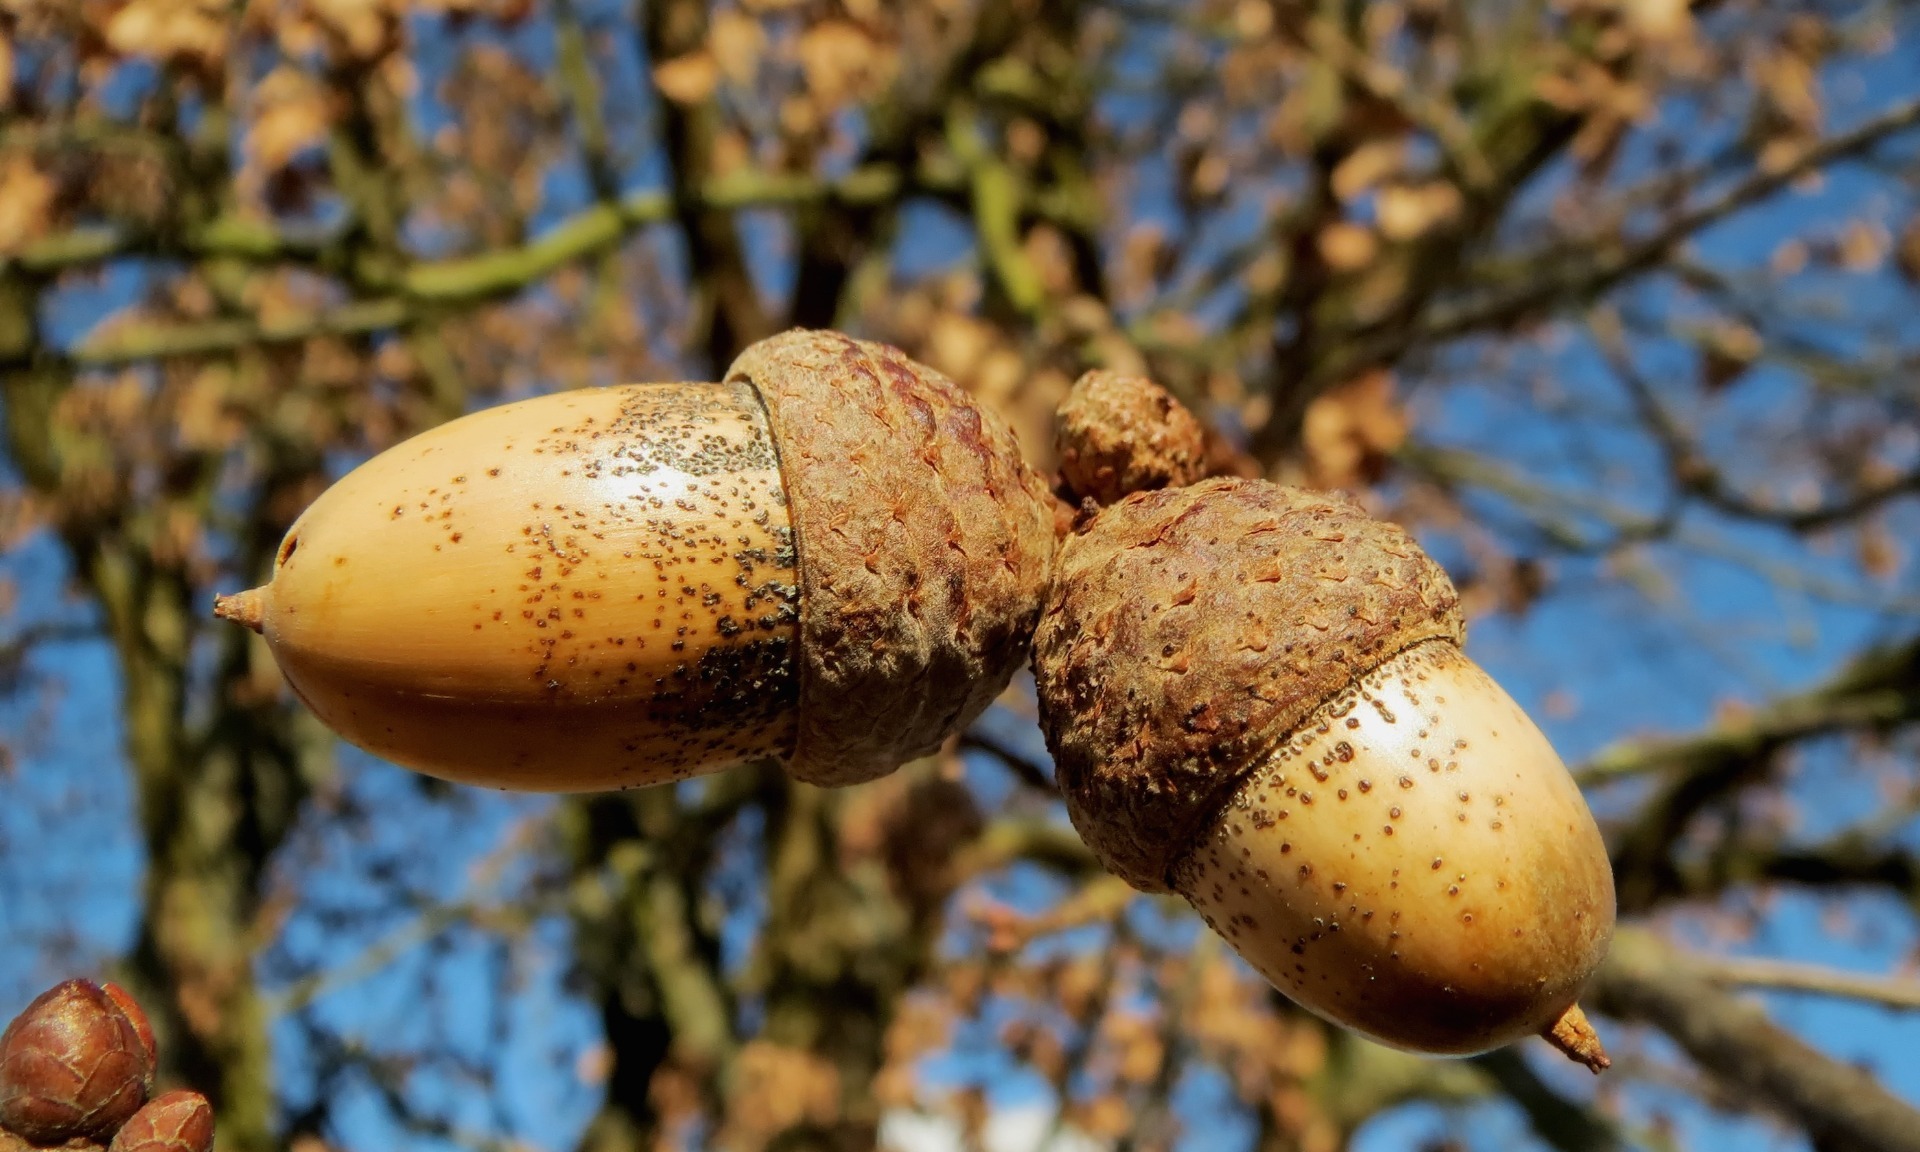 Two acorns hanging from a tree against a blue sky